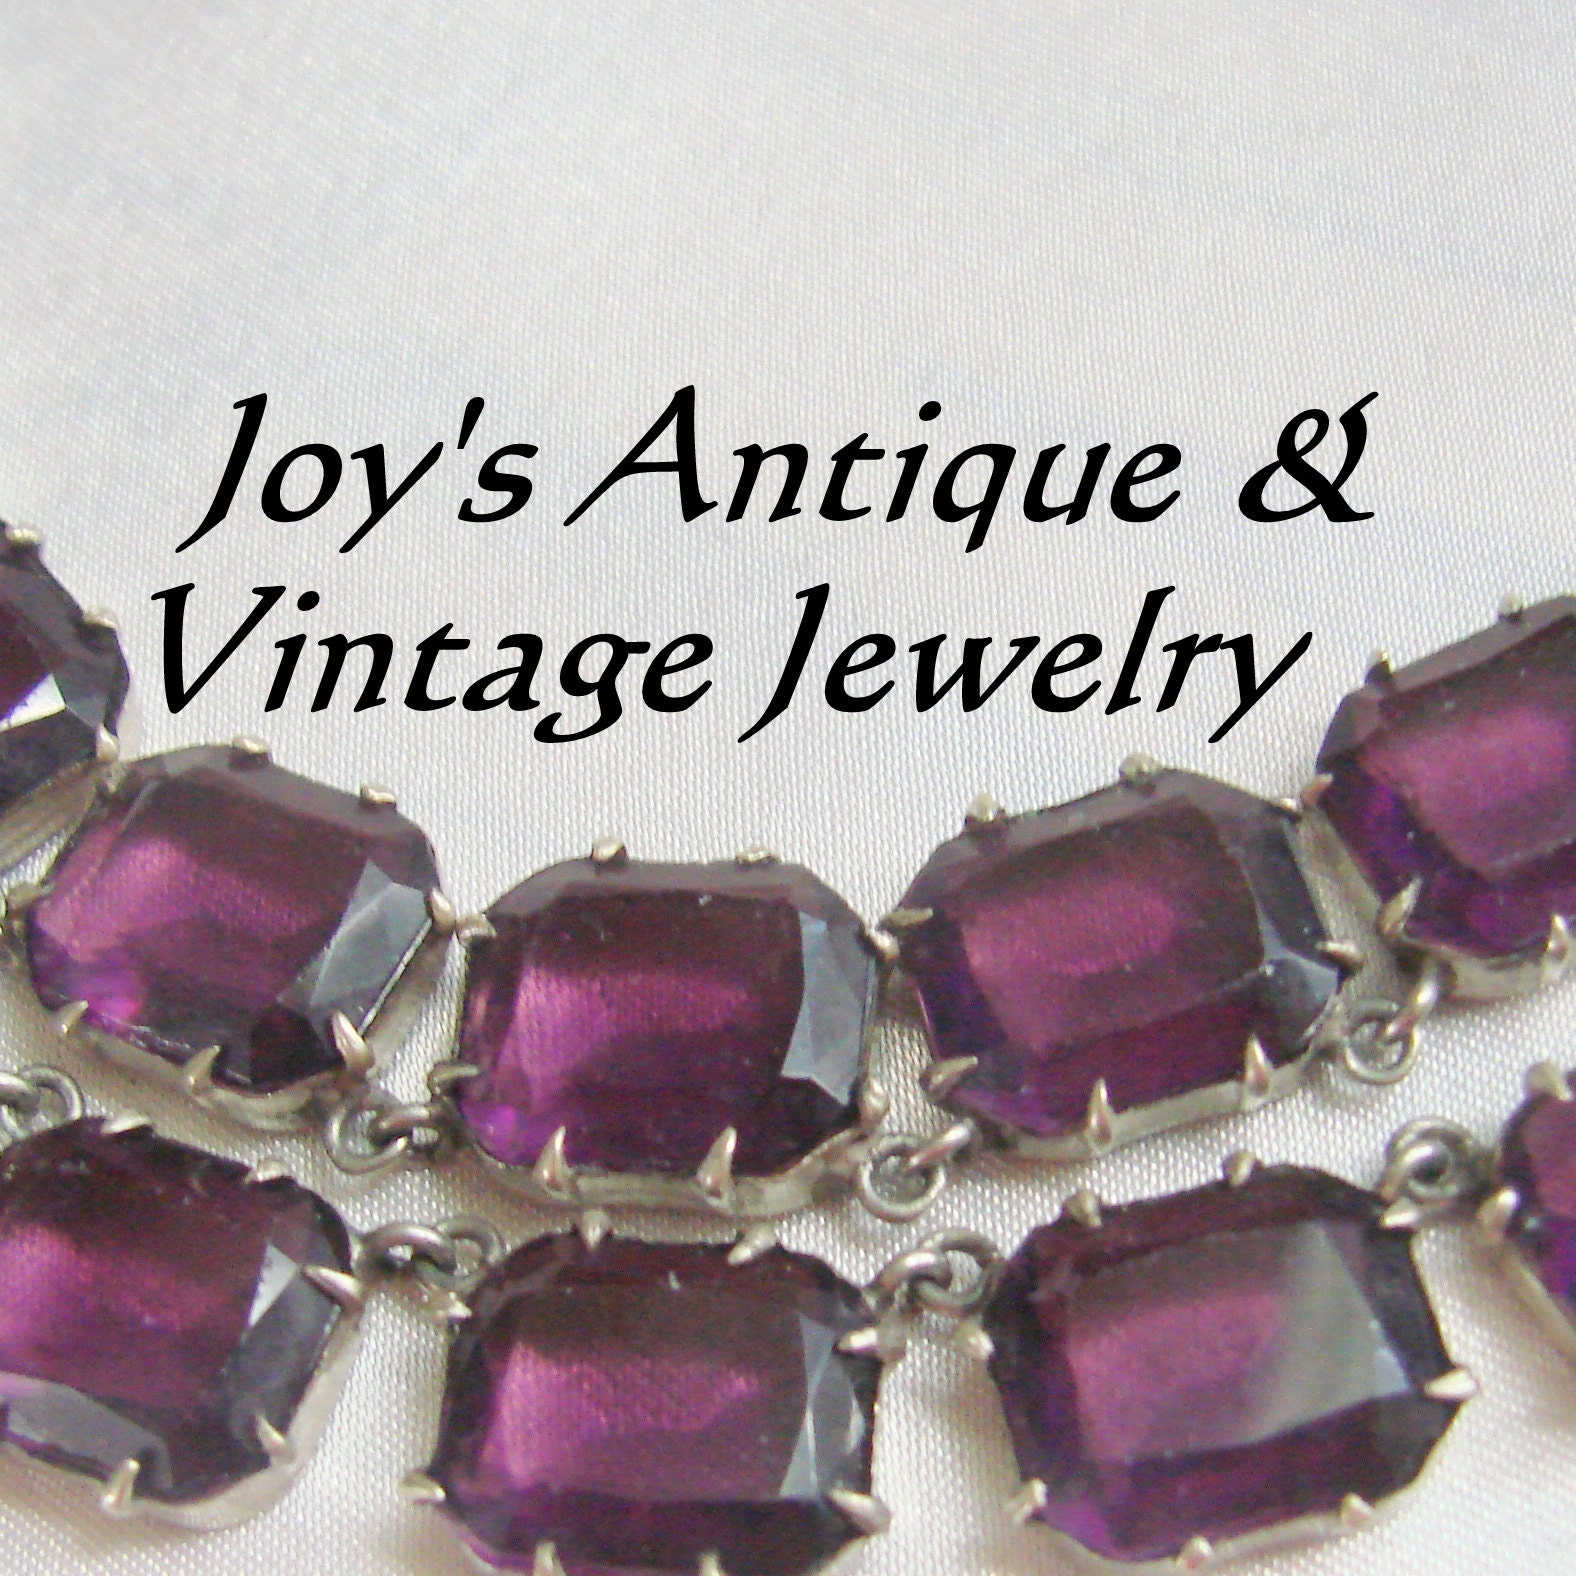 JoysShop - Specializing in Quality Vintage & Antique Jewelry